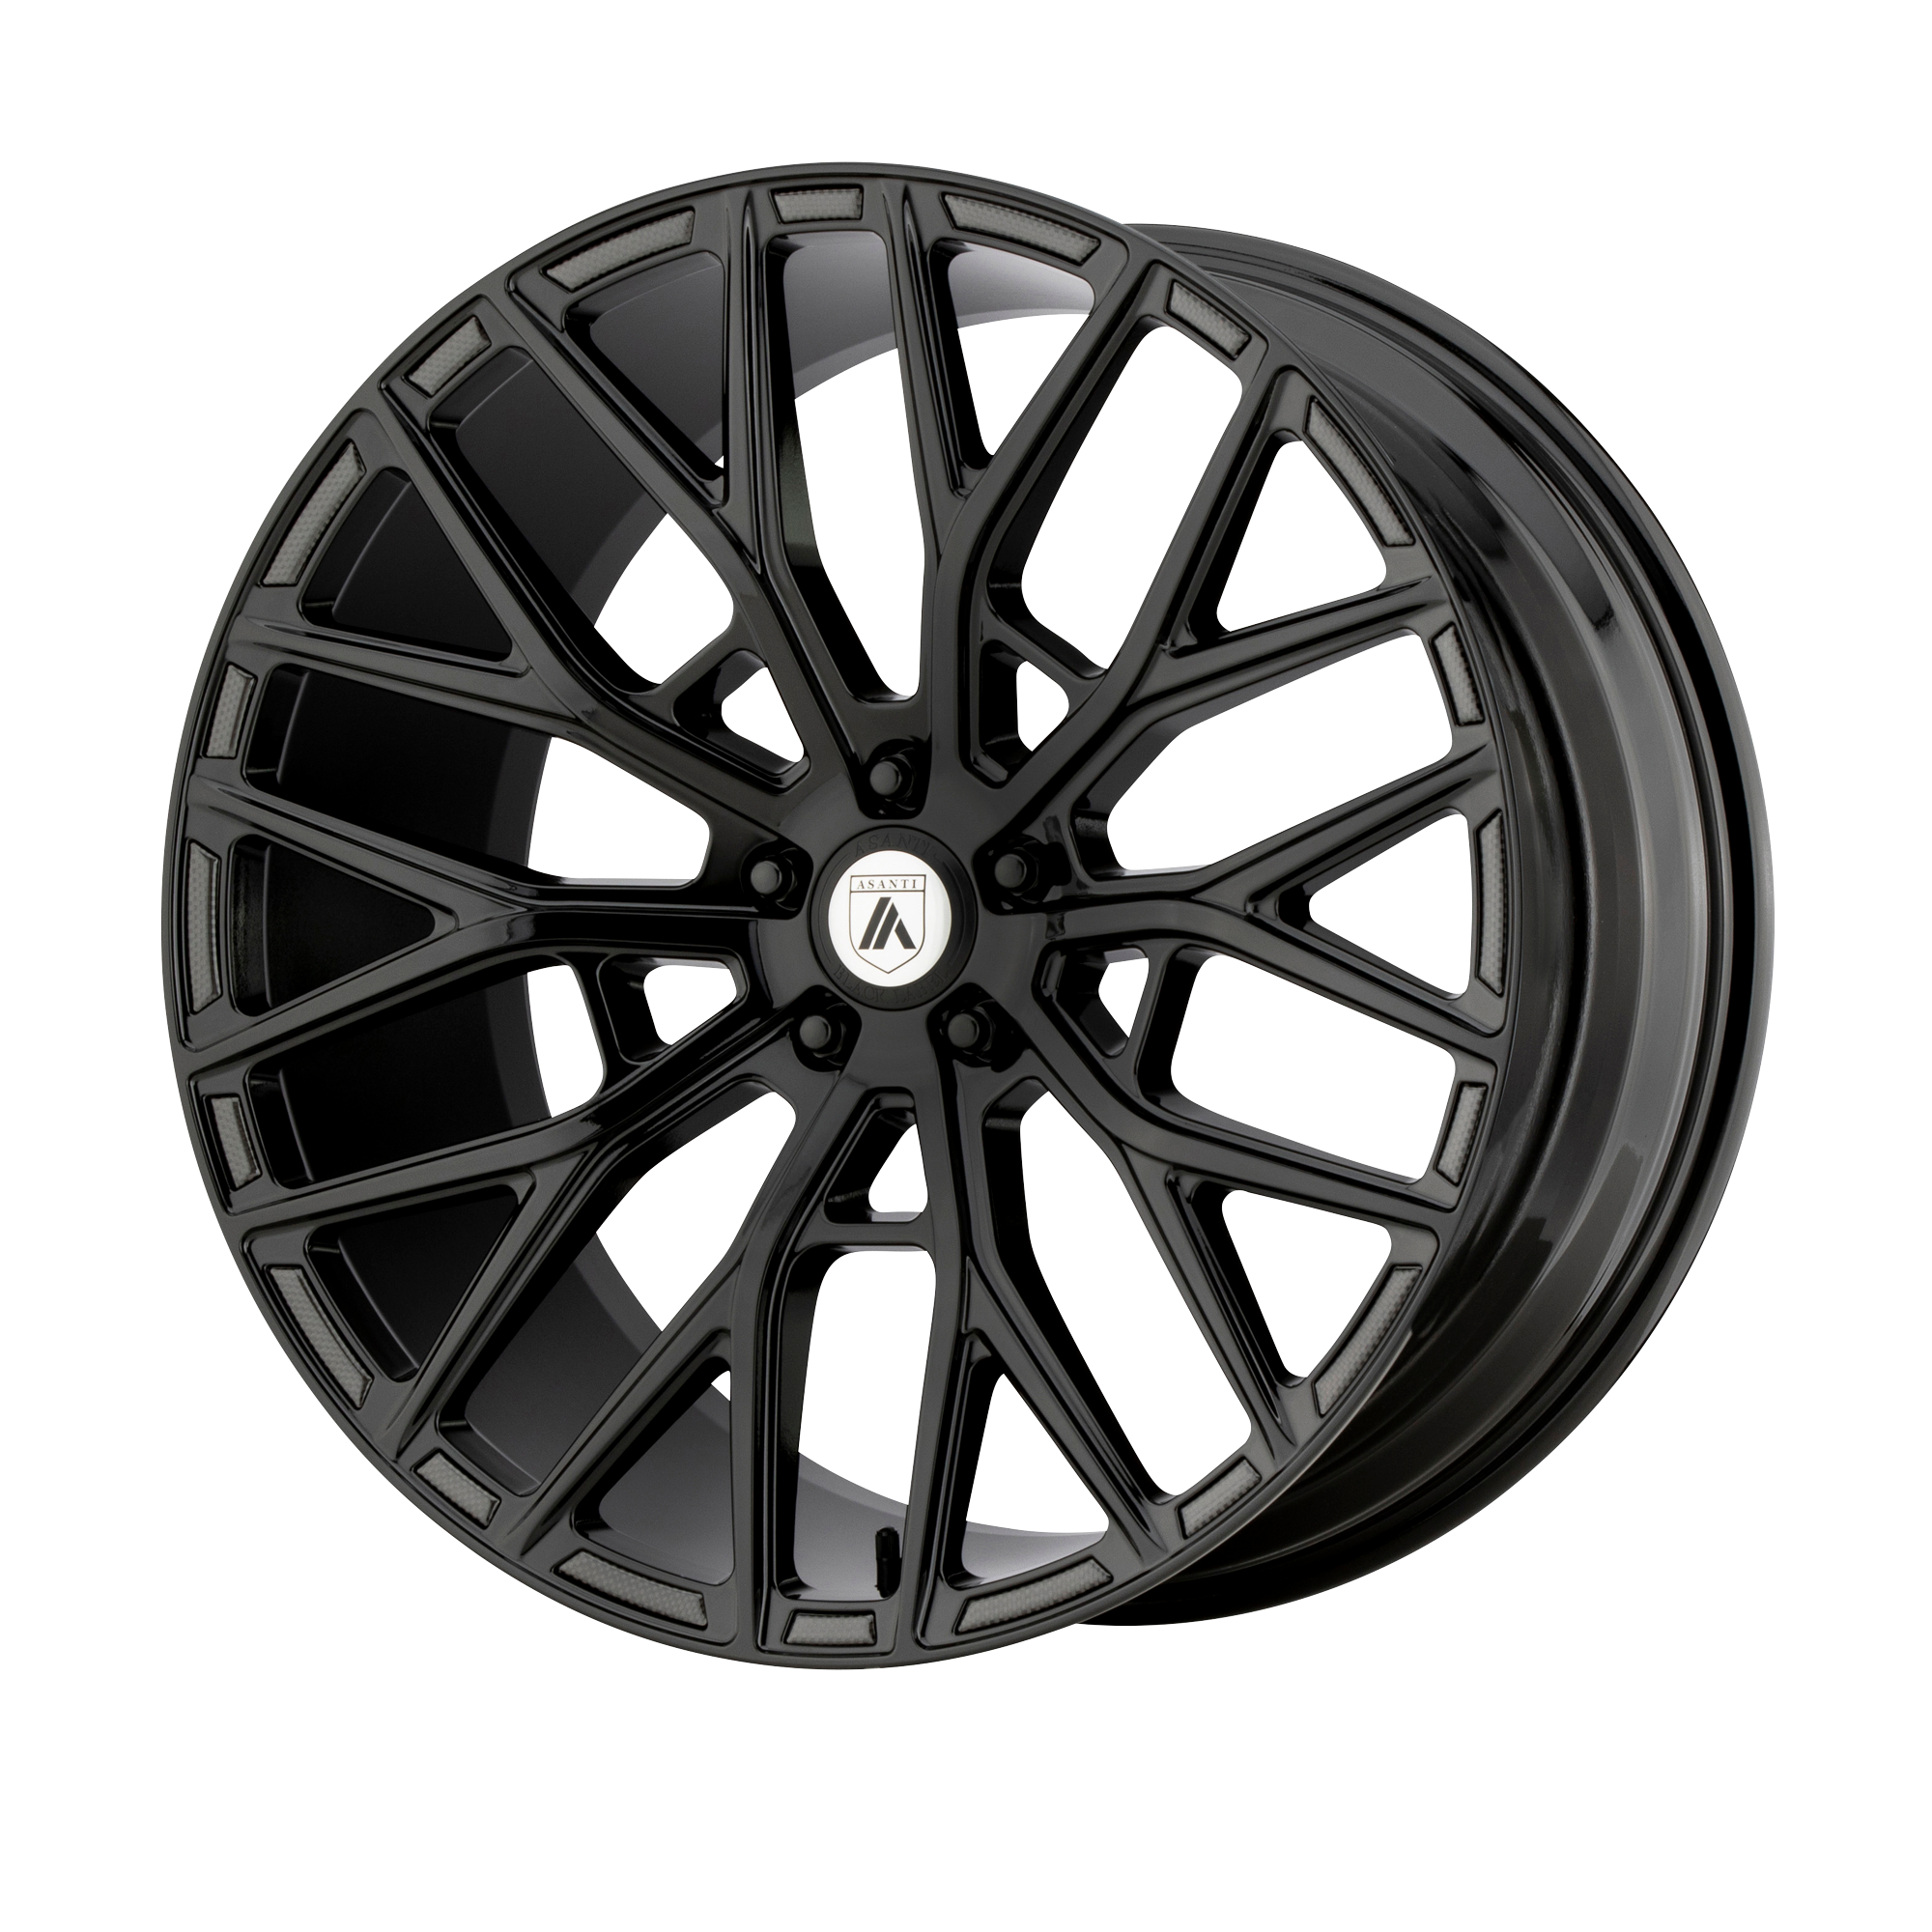 LEO 20x8.5 5x114.30 GLOSS BLACK (38 mm) - Tires and Engine Performance